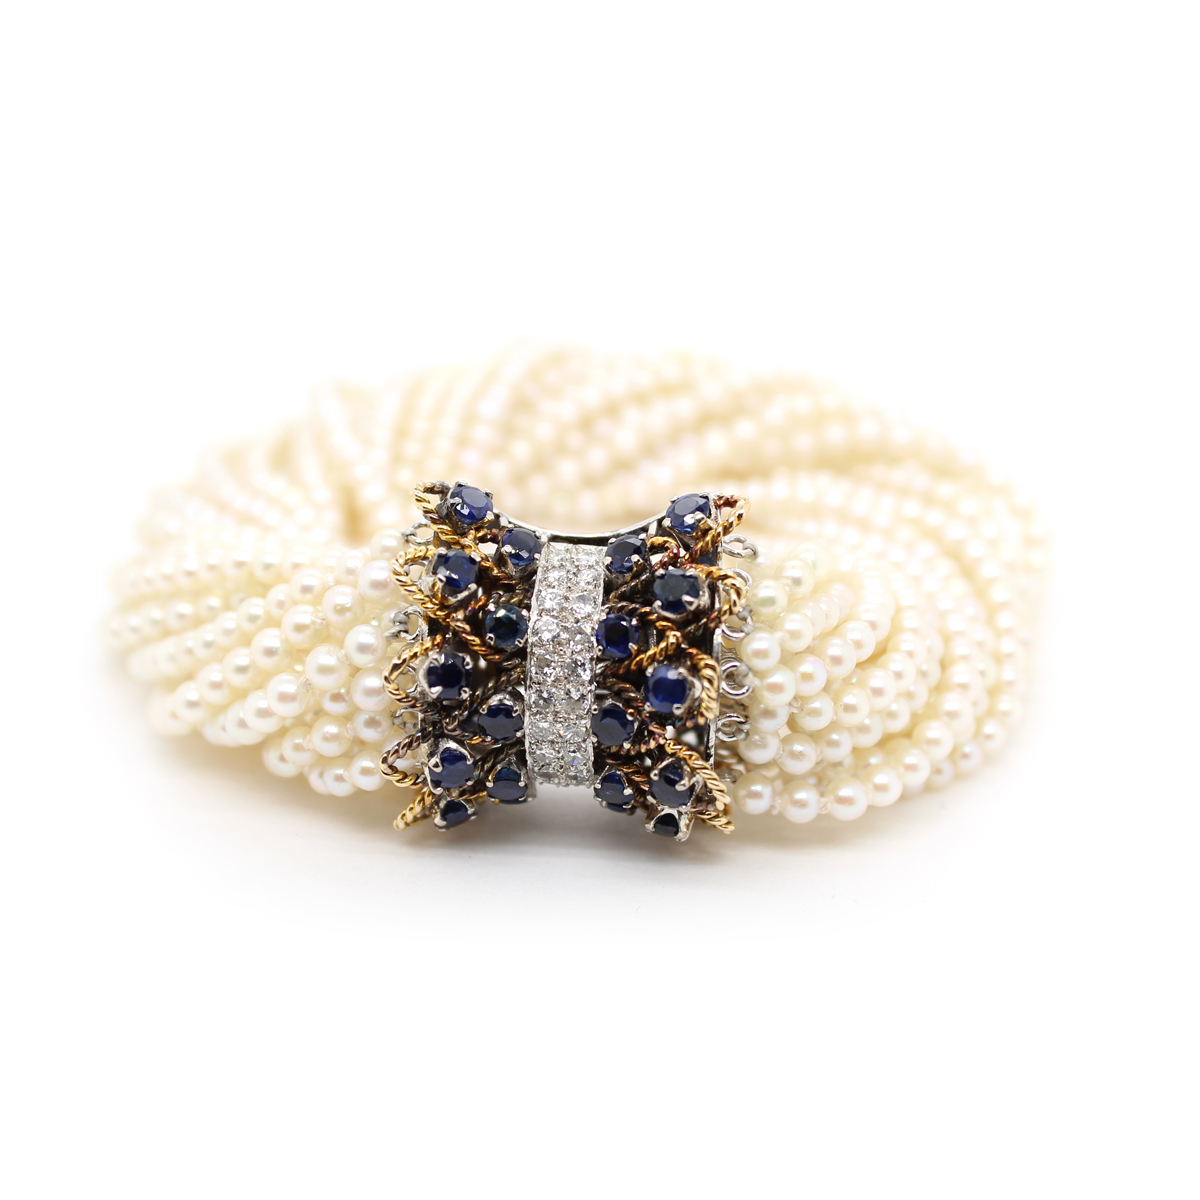 Van Cleef & Arpels Multi Strand Cultured Pearl Torsade Bracelet With A Platinum & 14 Karat White And Yellow Gold Diamond Clasp